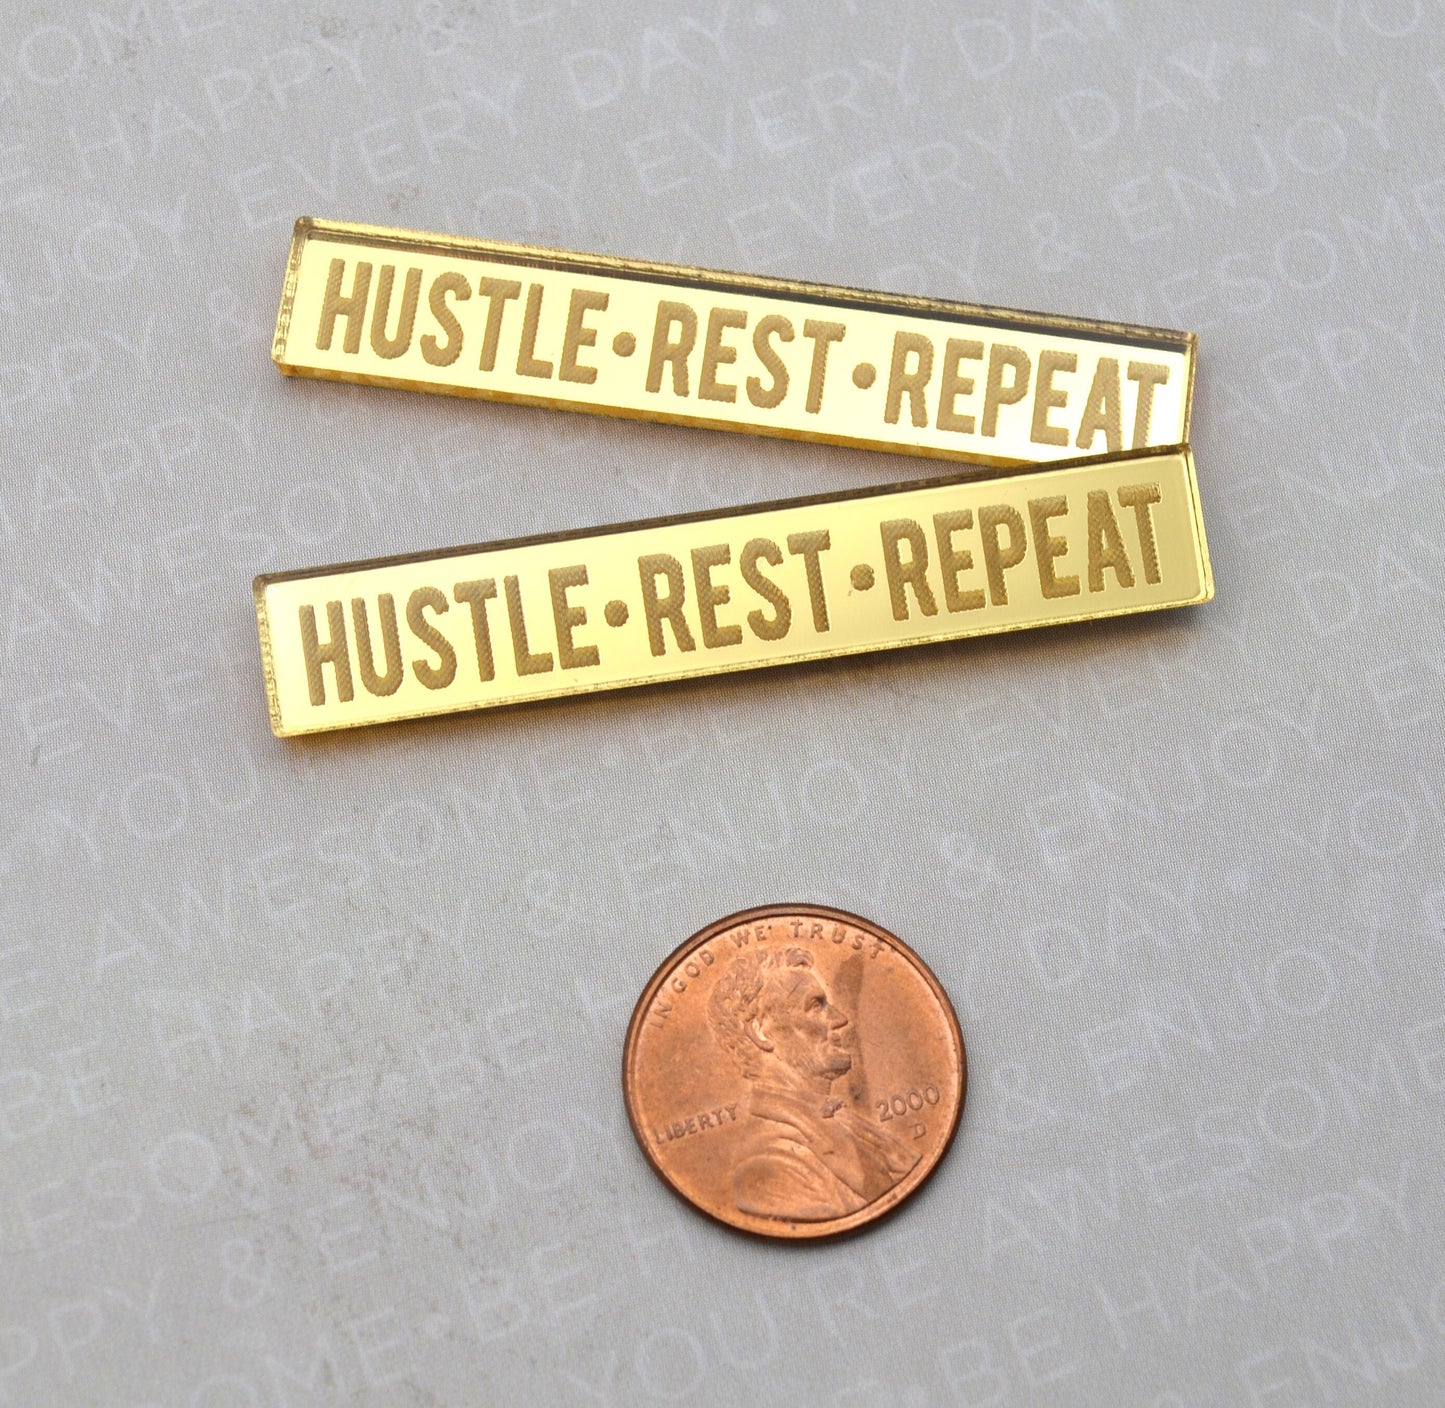 HUSTLE REST REPEAT - 2 Gold Mirror Cabochons- Laser Cut Acrylic Cab